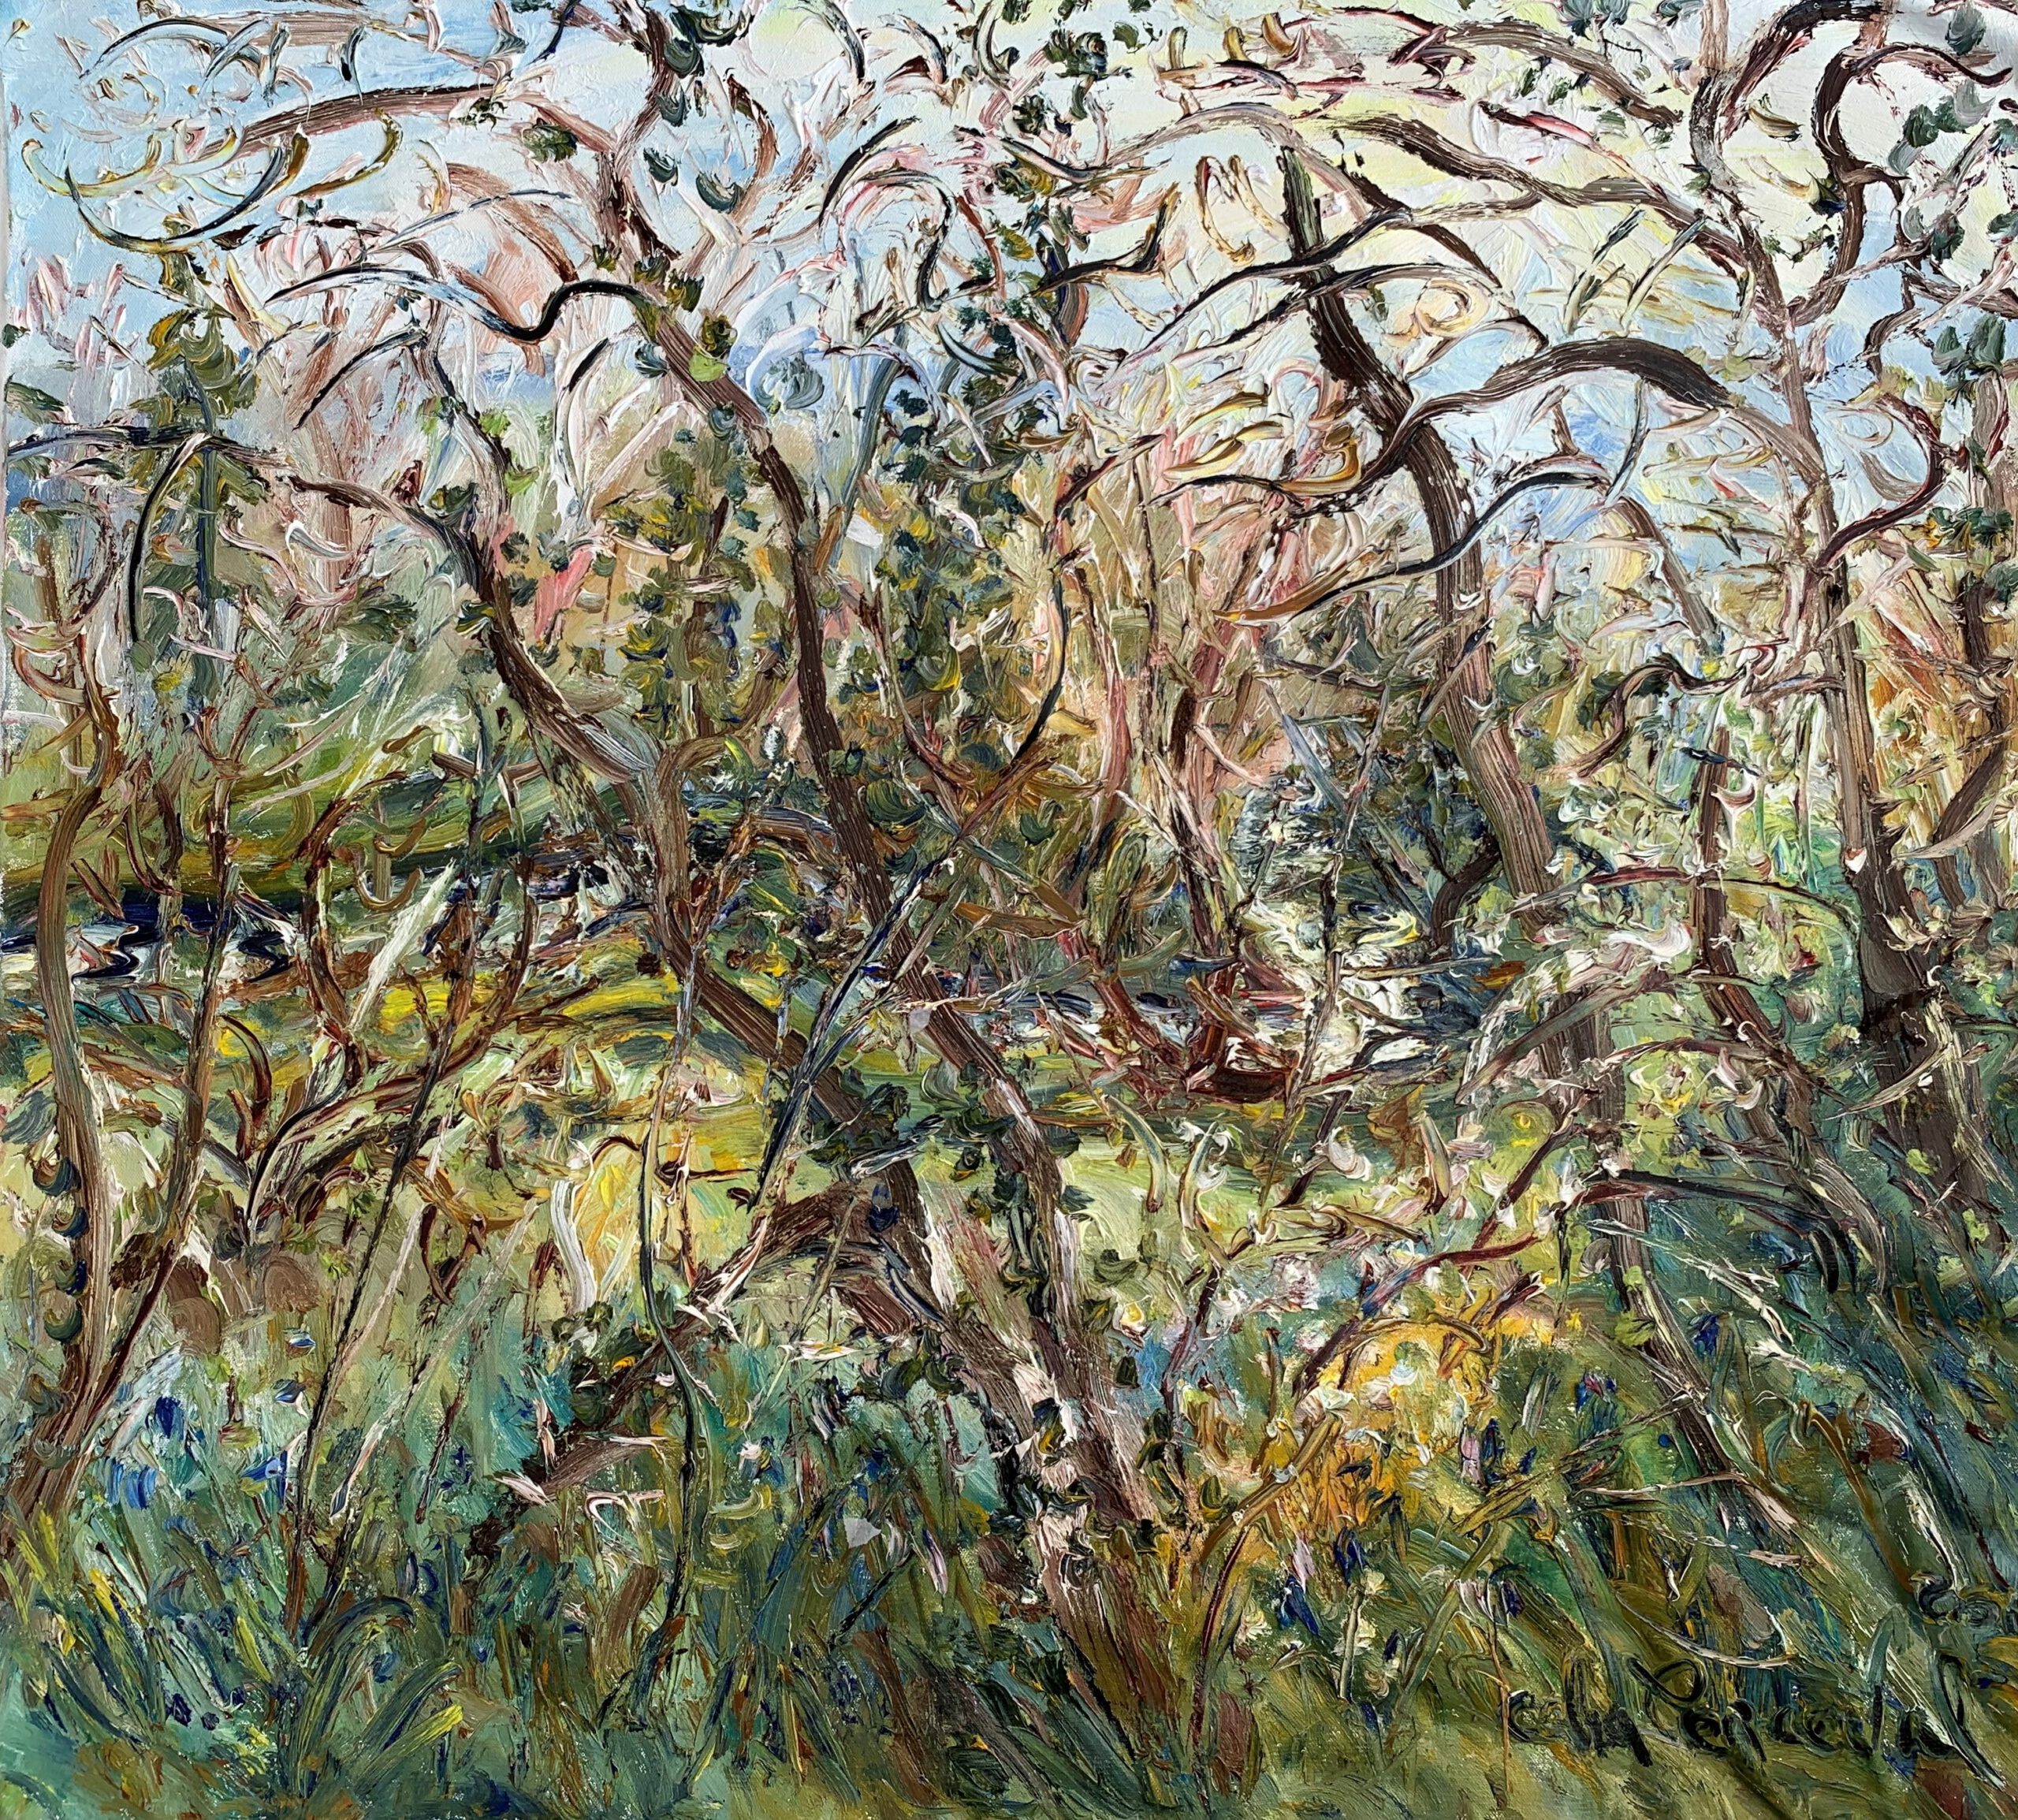 Celia Perceval 'The Hindwell Brook Winding Through the Woods with Bluebells and Blossom' oil on canvas 76 x 83cm $14,000